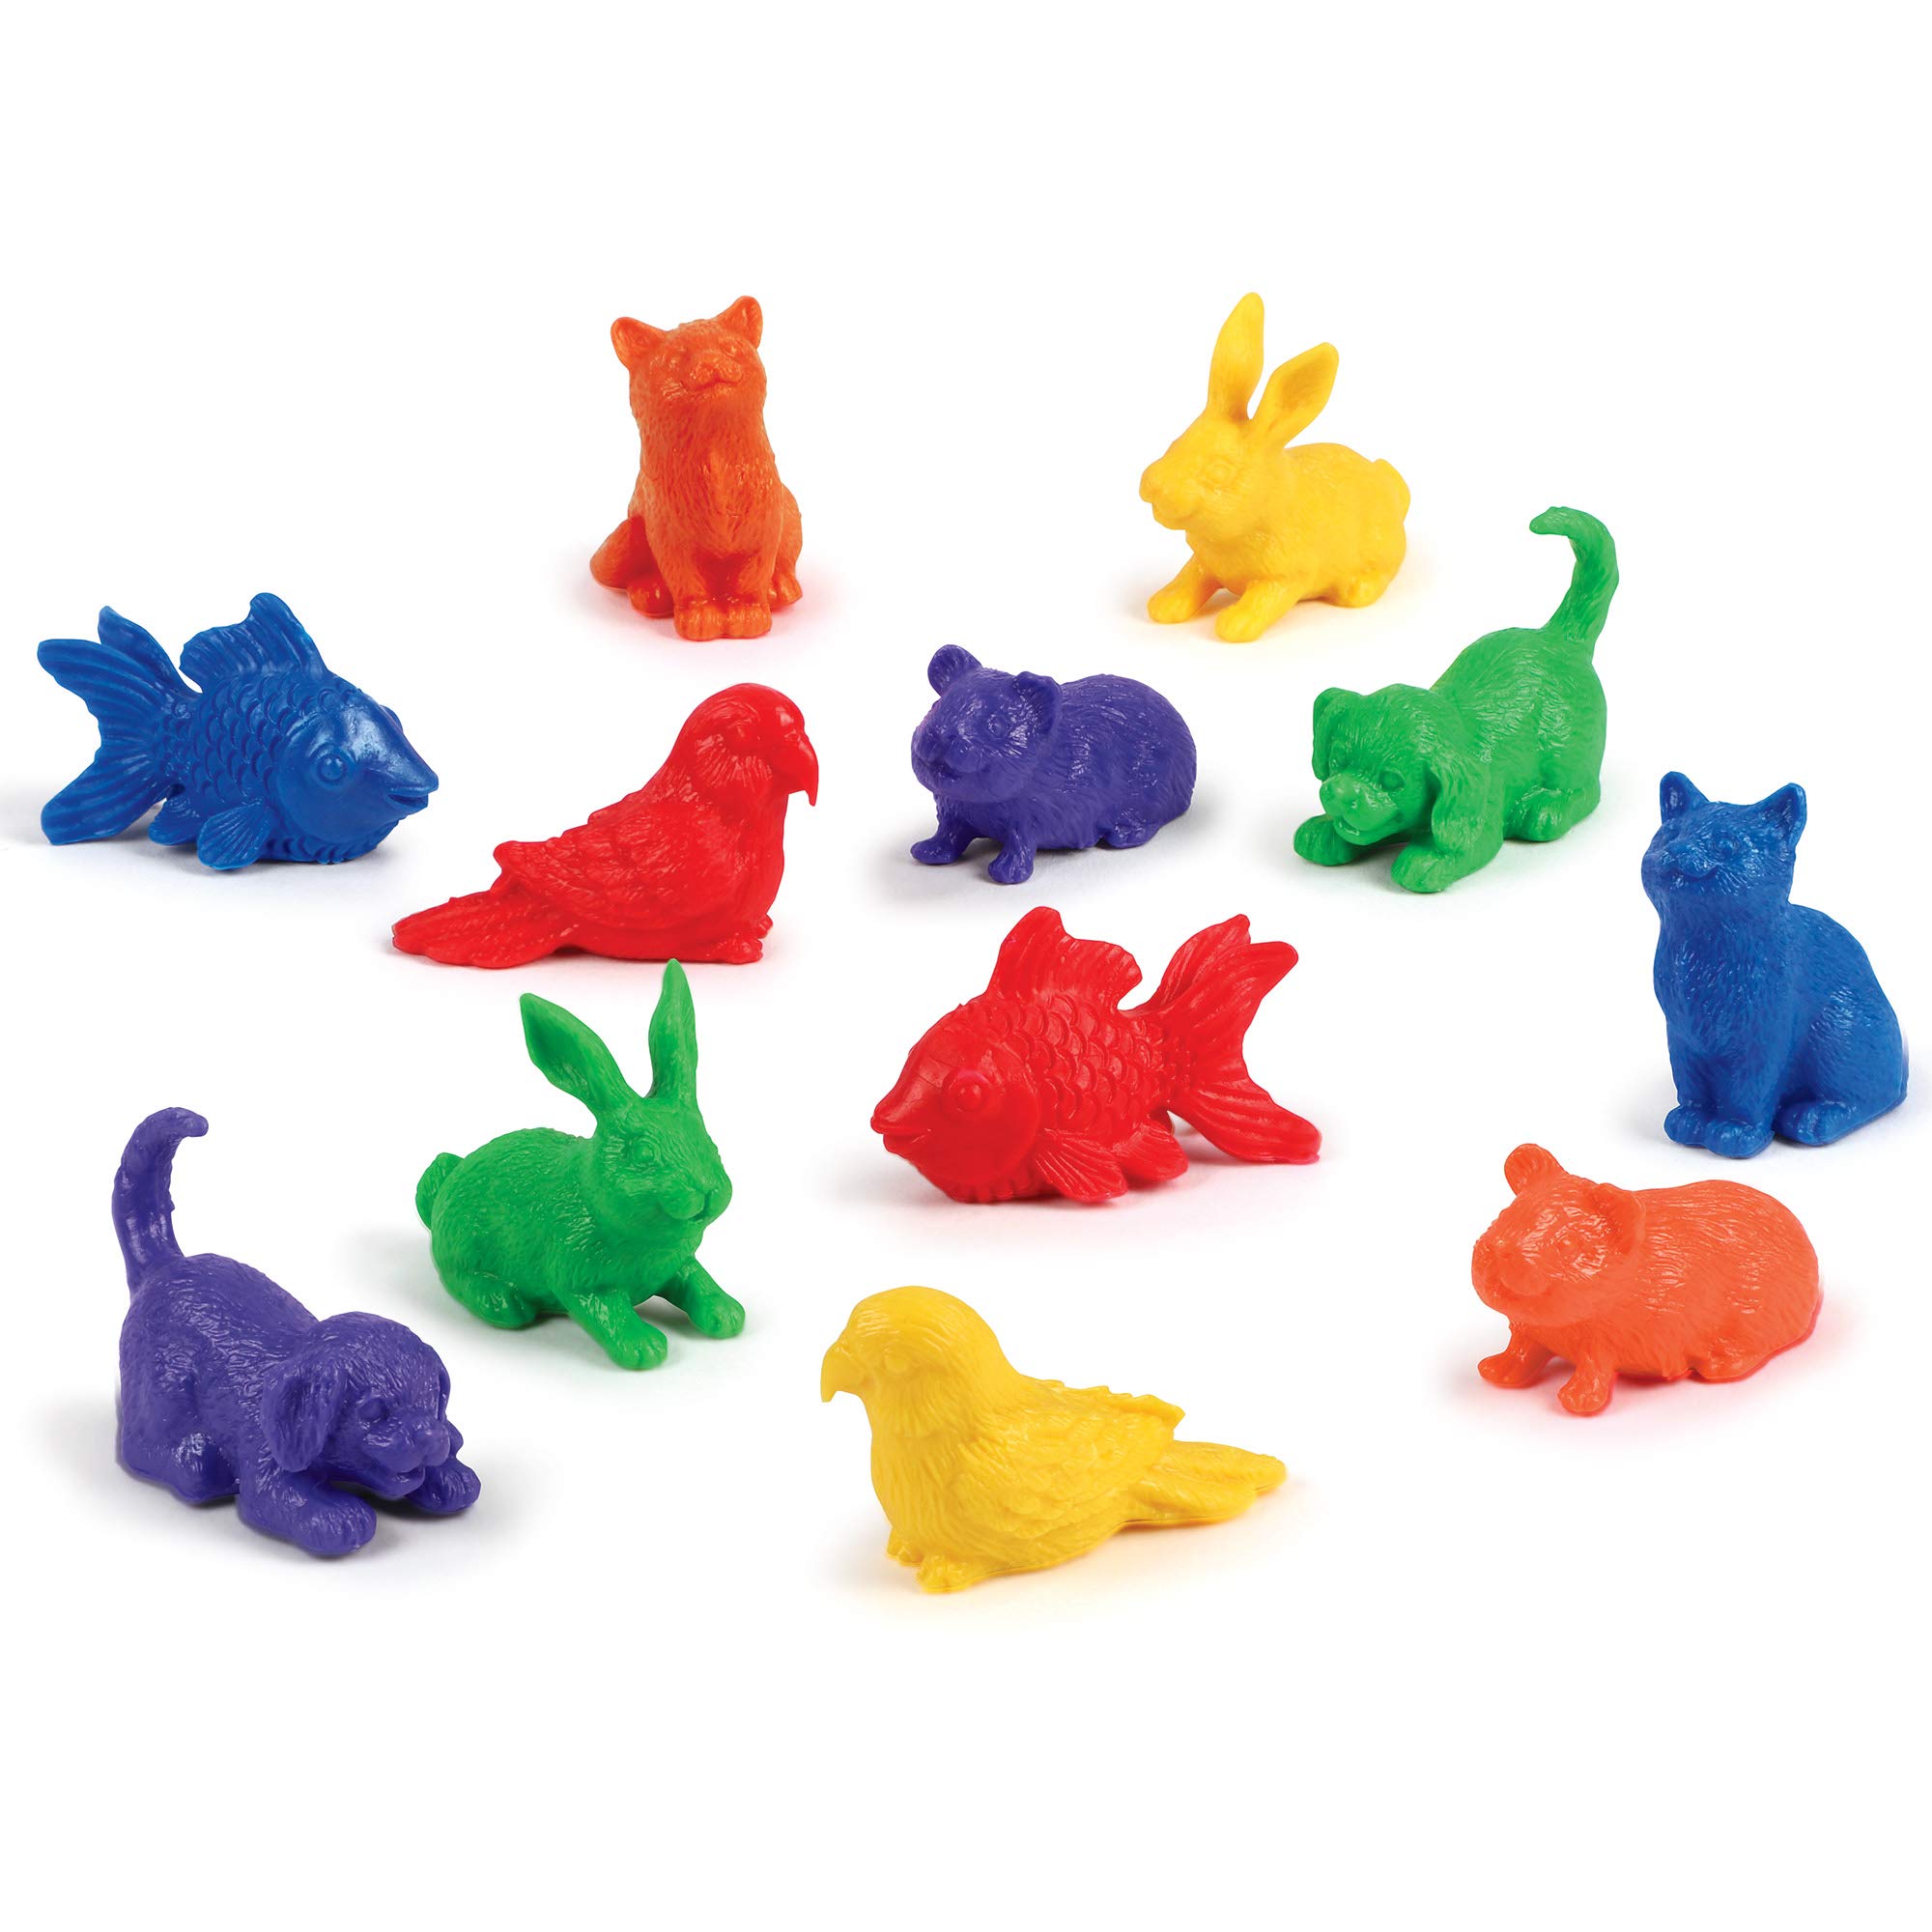 Learning Resources Domestic Pets Counters, Educational Counting and Sorting Toy, Set of 72